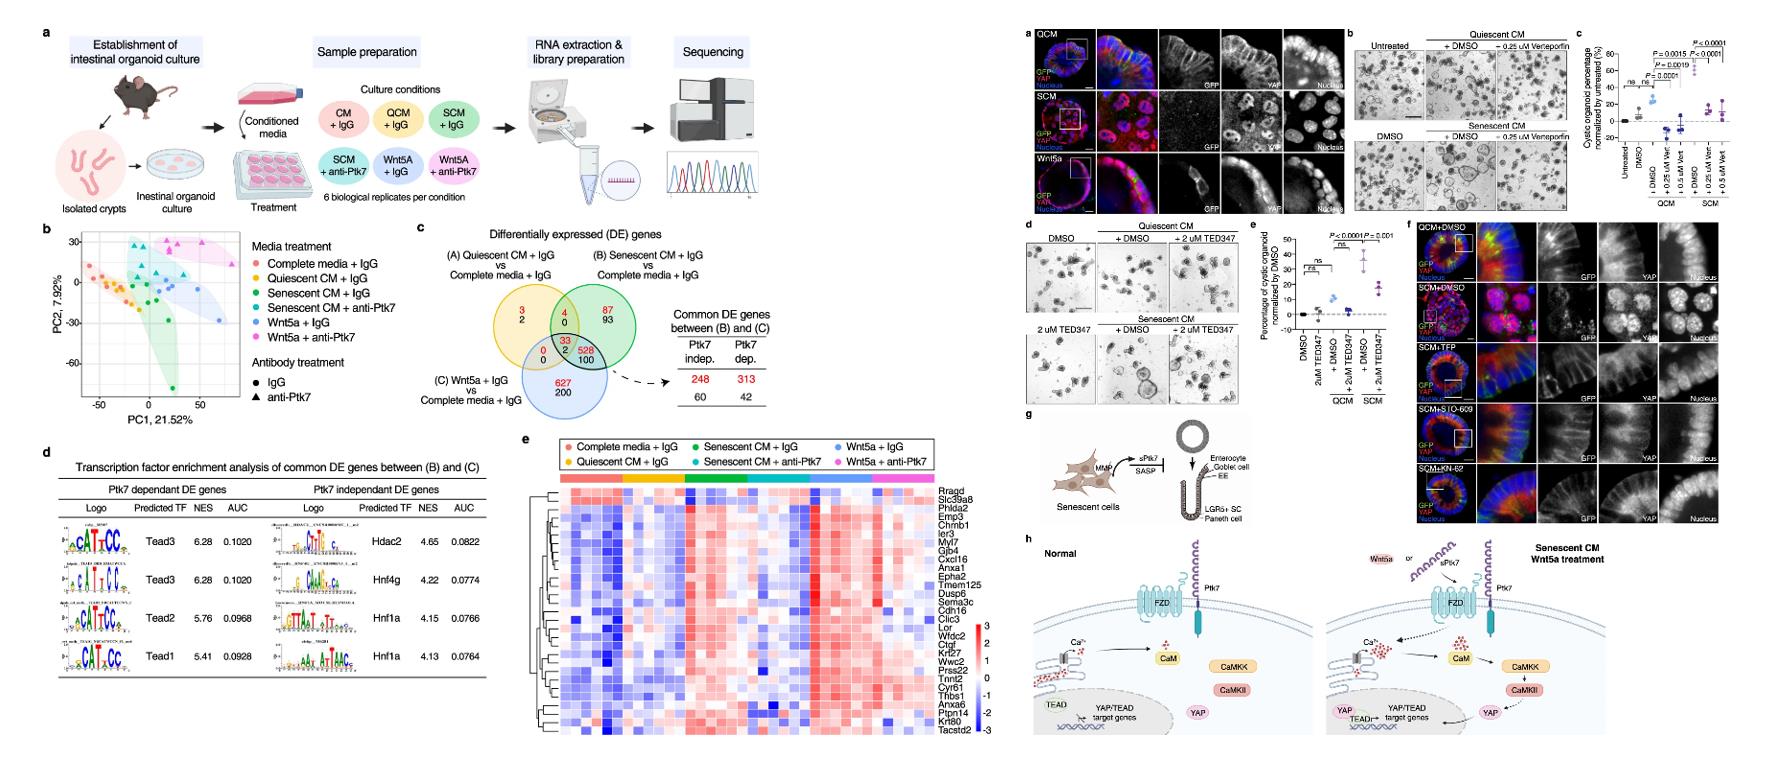 Left: Transcriptomes of organoids shows enrichment of TEAD binding motifs among Ptk7-dependent DE genes; Right: Correlation between nuclear YAP localization and cystic organoid morphology and connection to Ca2+ signaling.